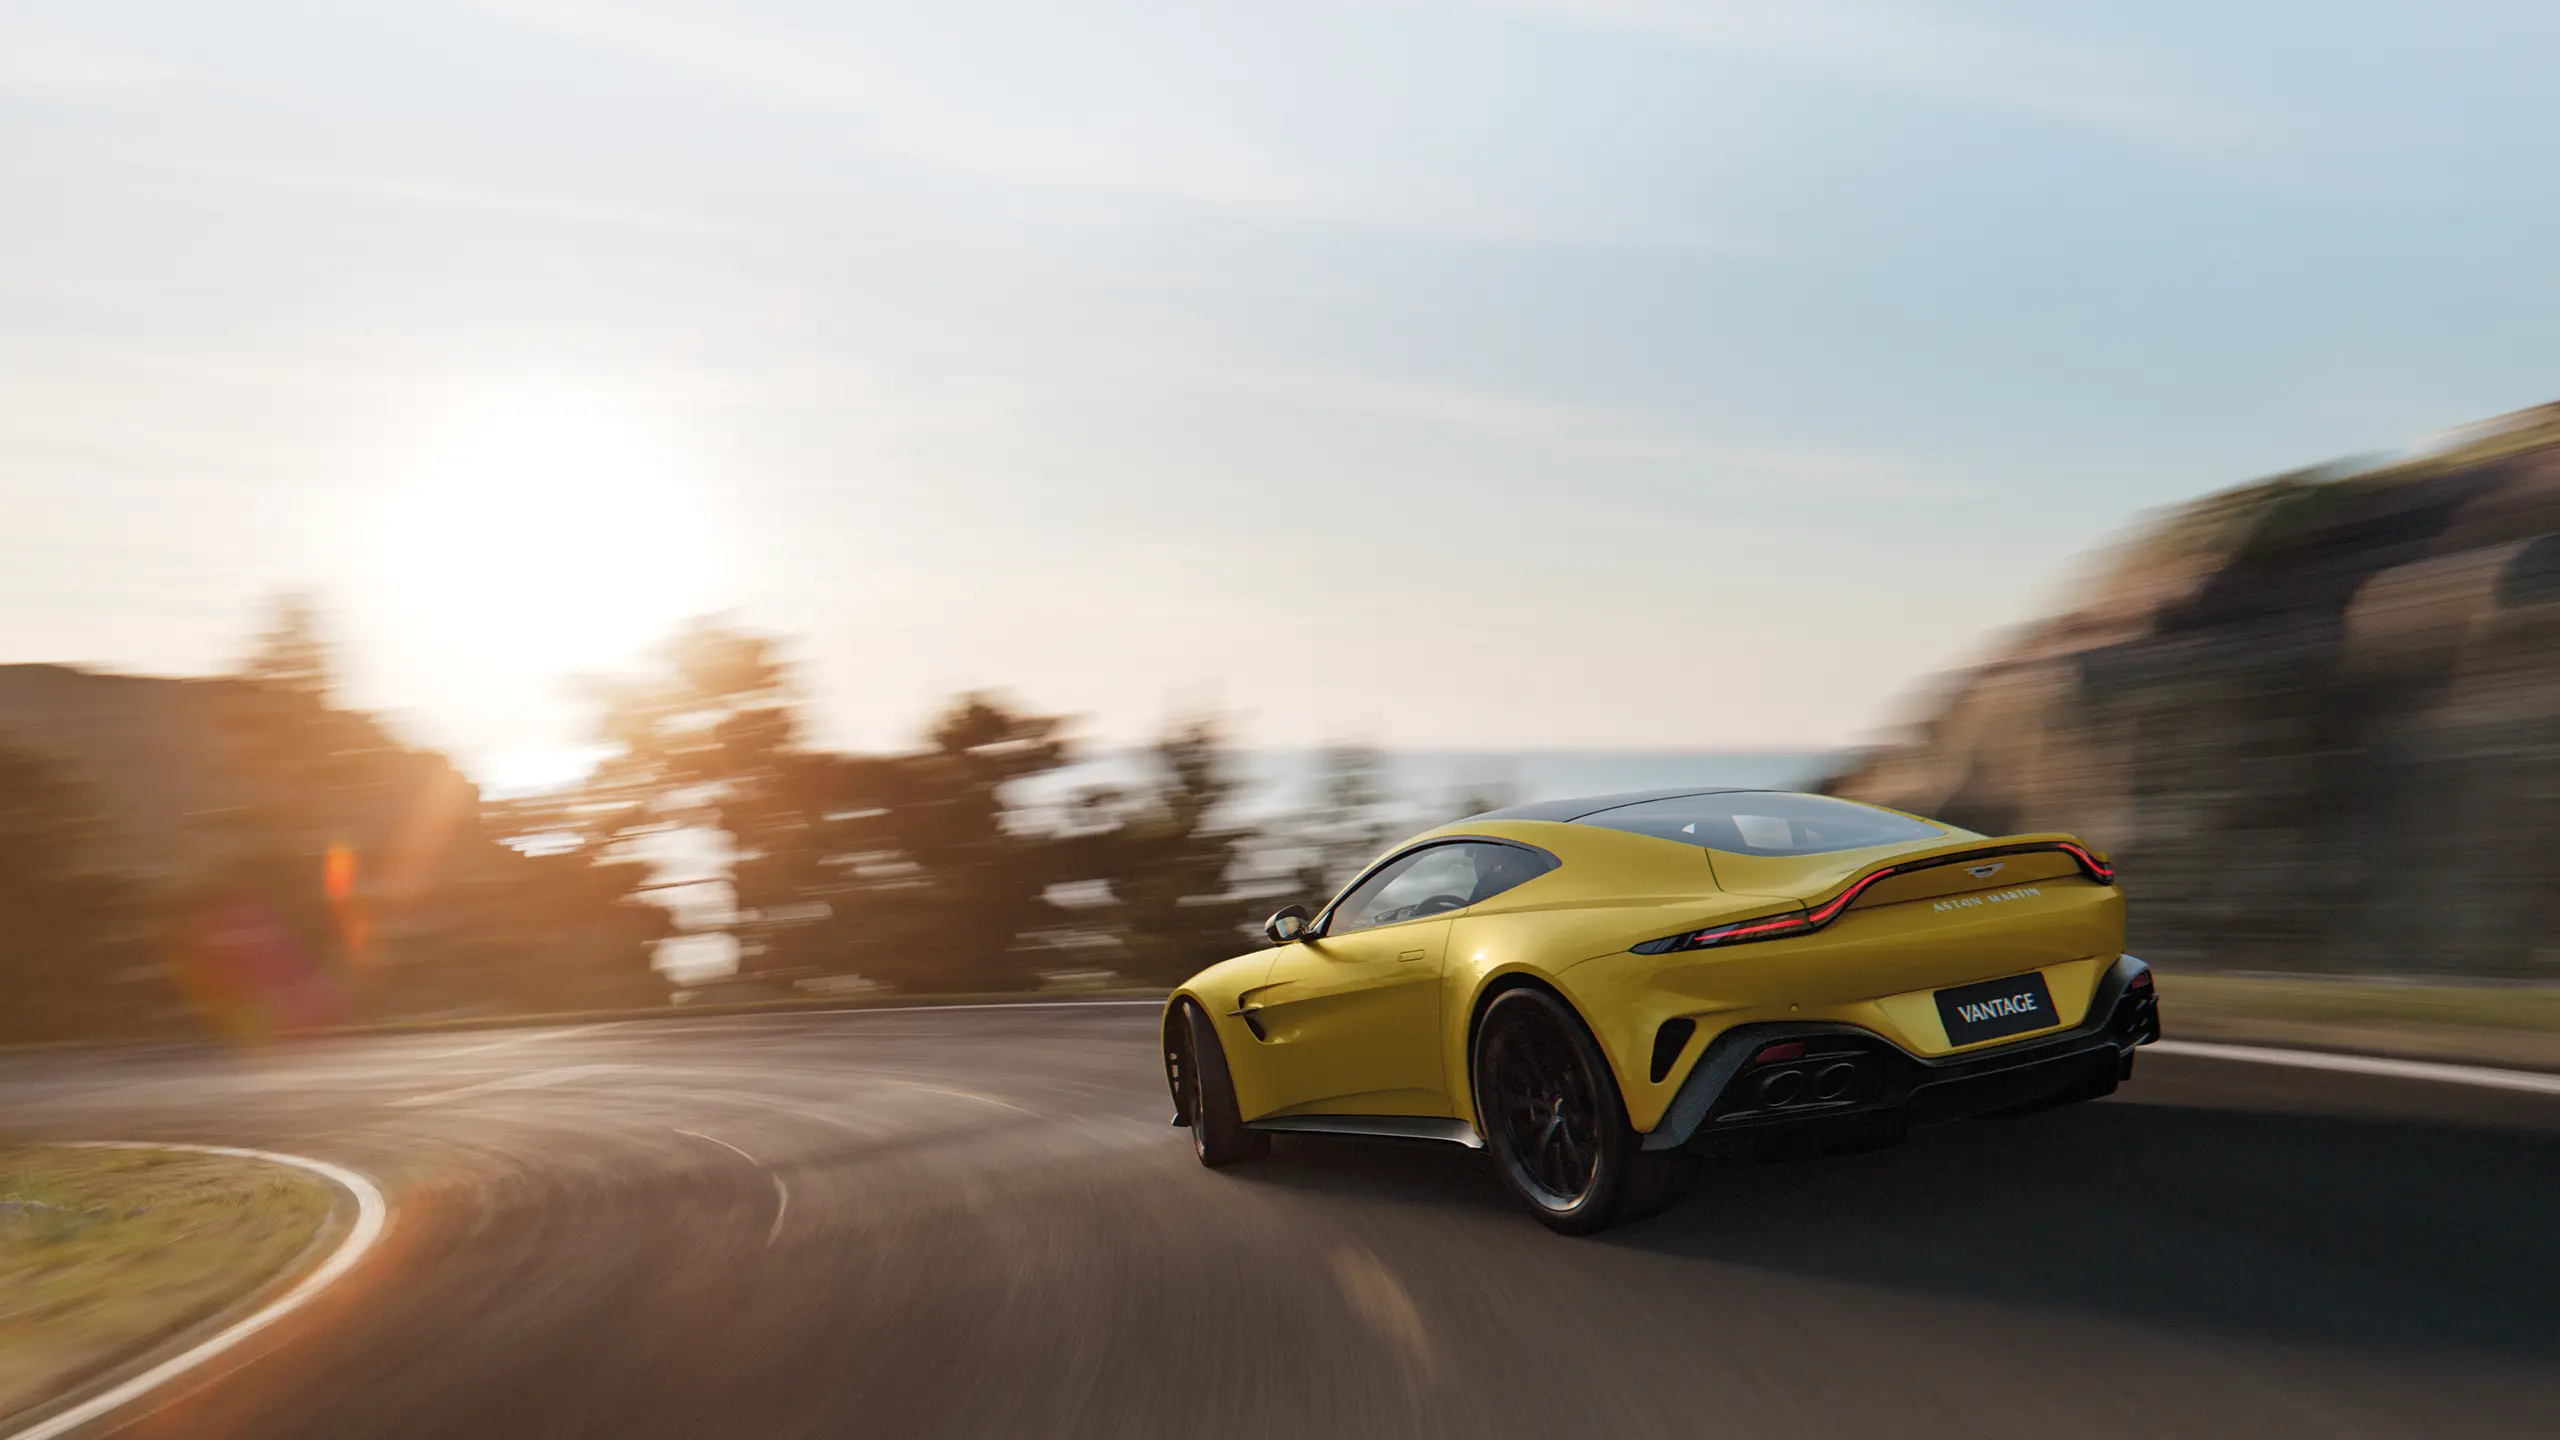 Introducing new Vantage: Engineered for real drivers